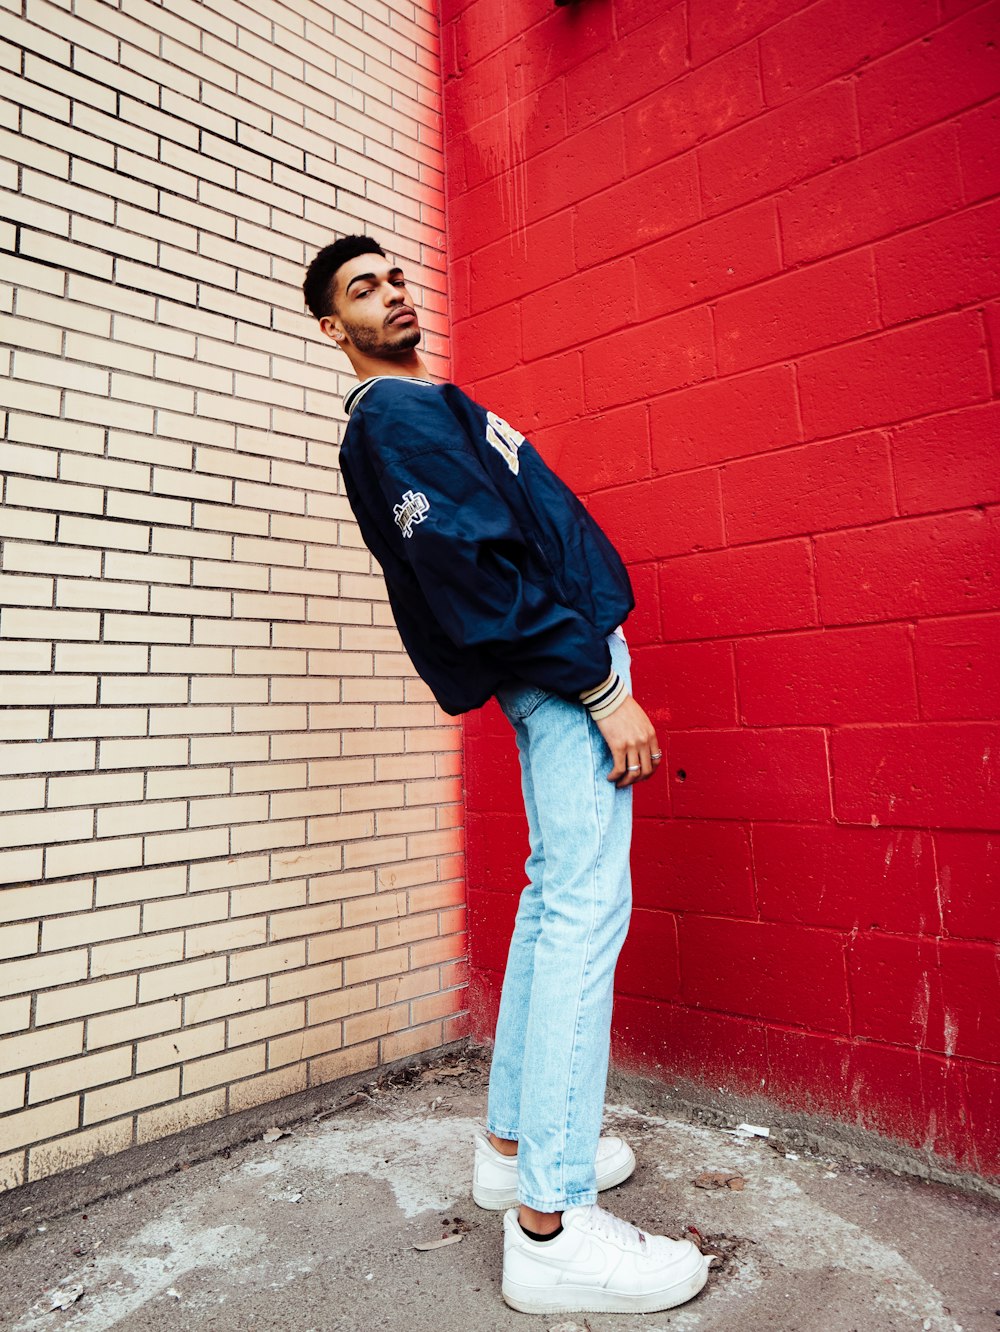 man in blue and black adidas jacket standing beside red brick wall